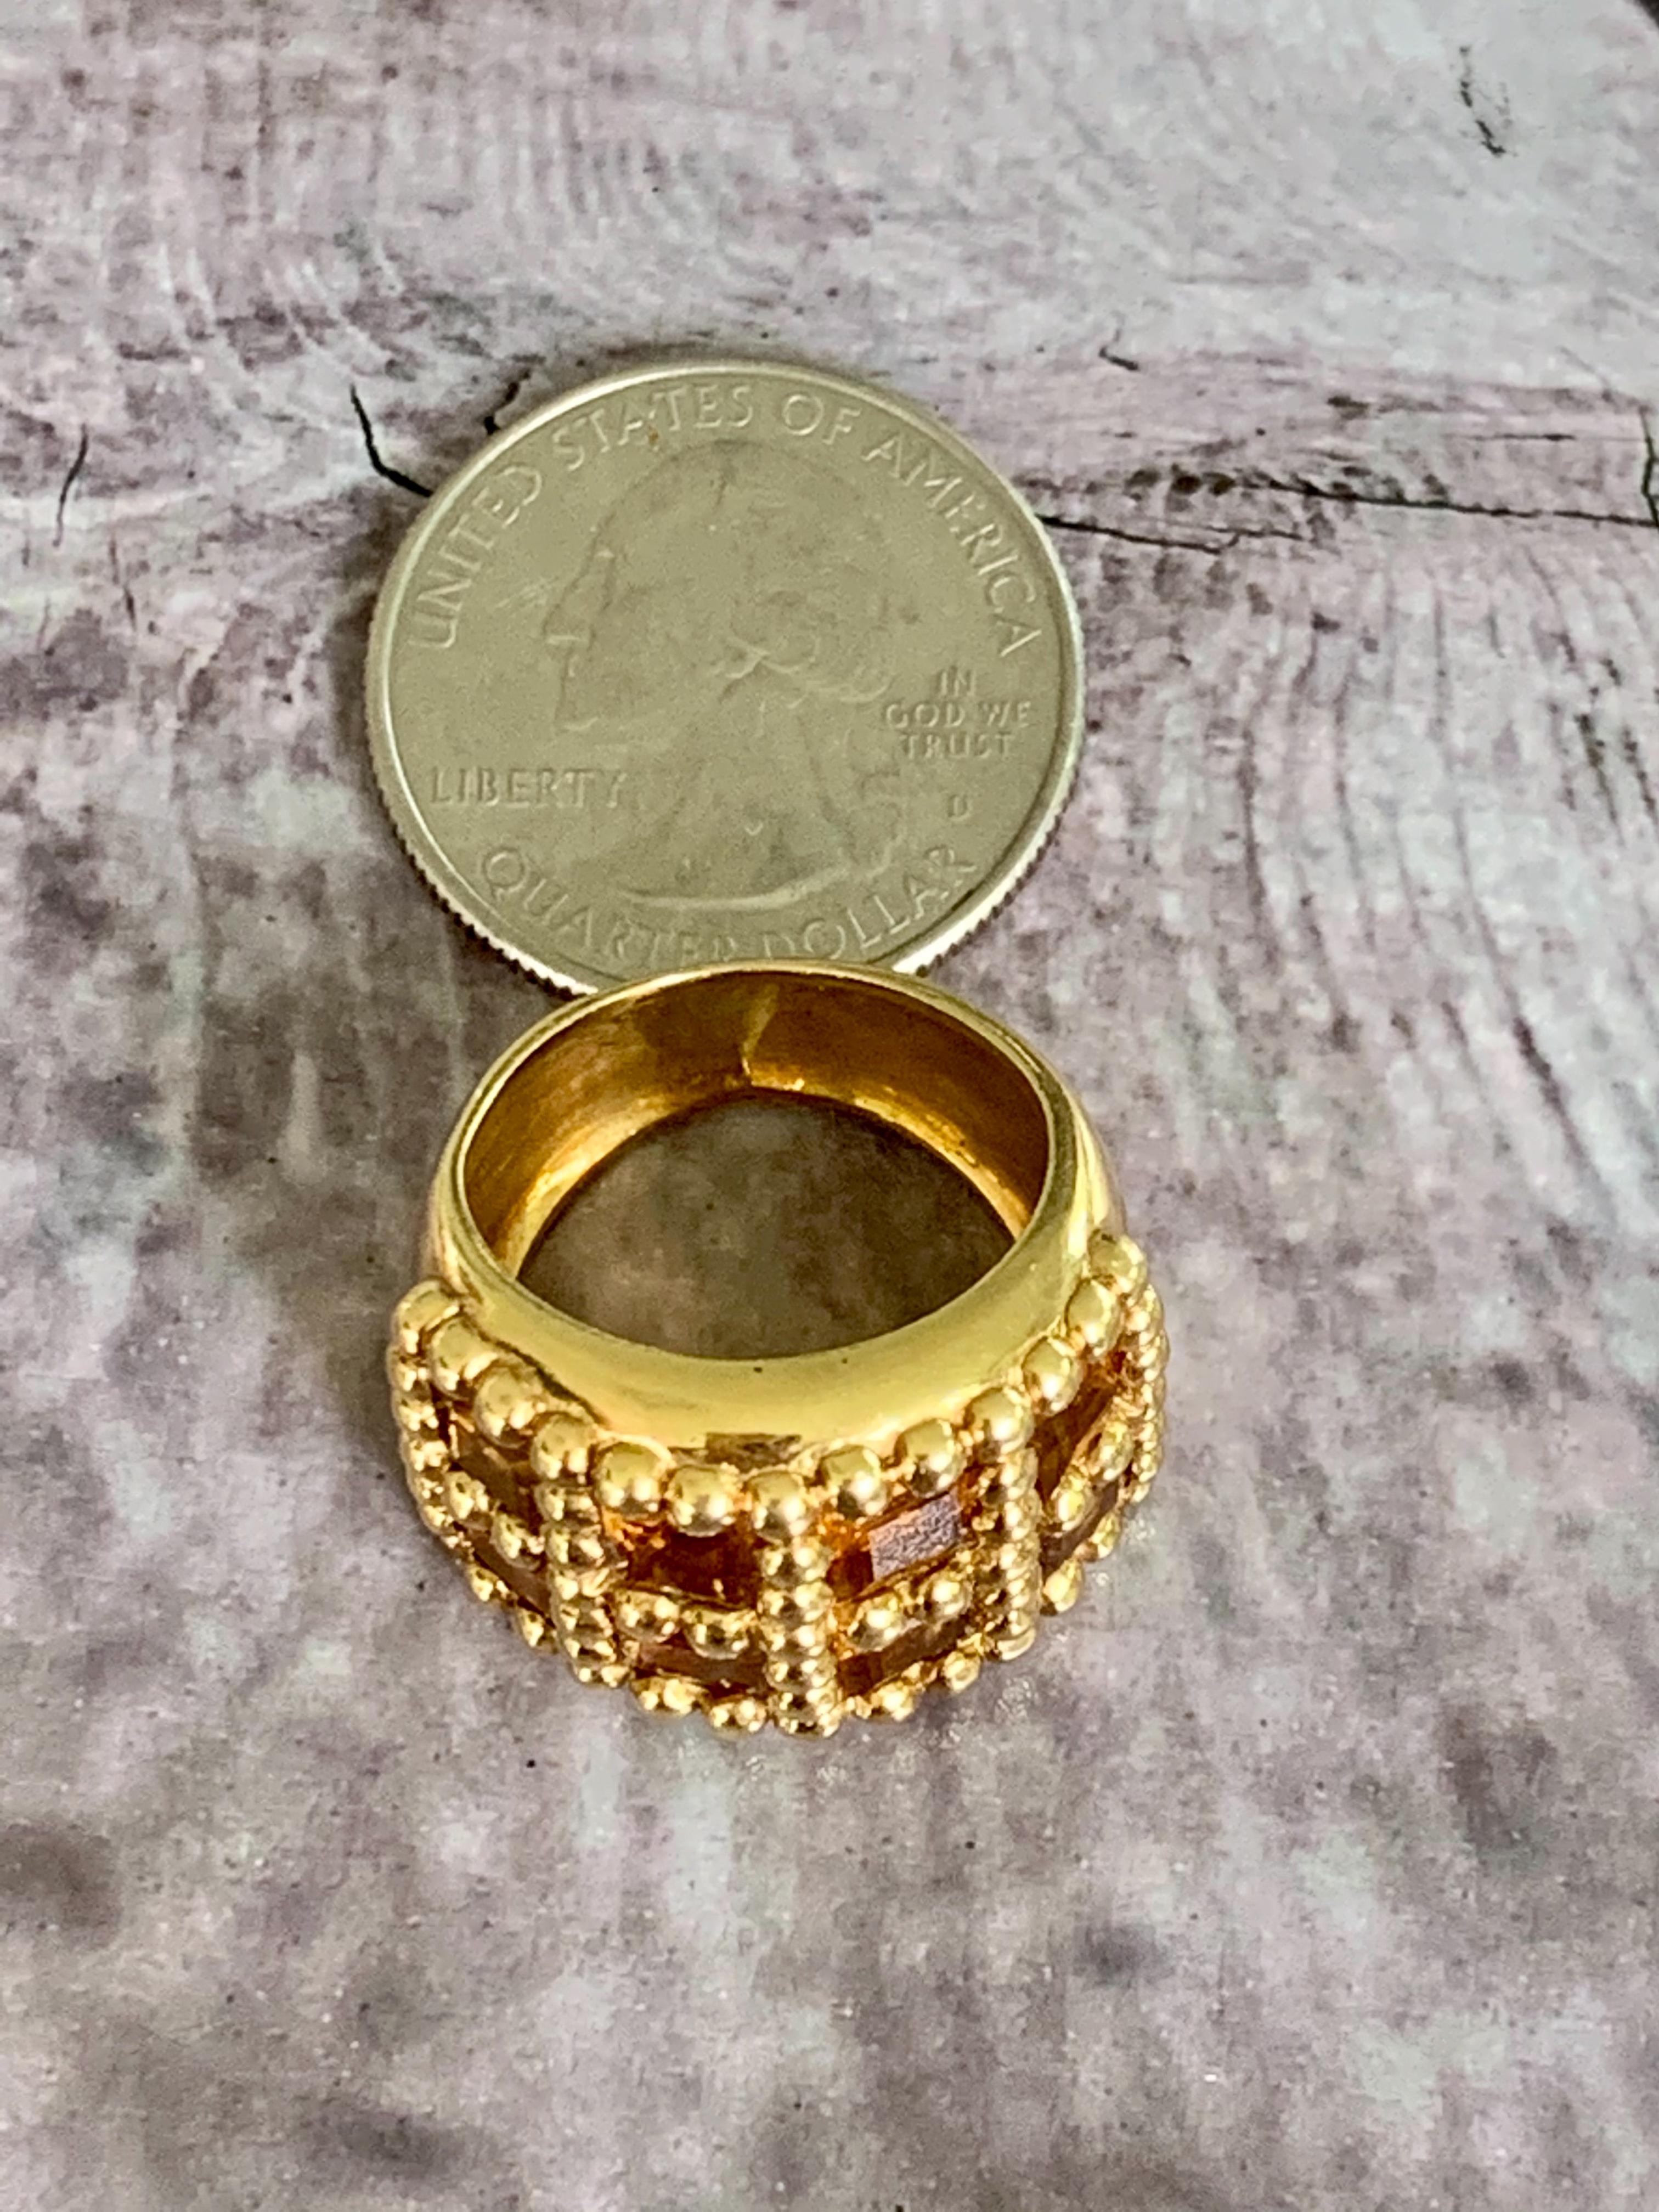 This ring features 8-5mm golden yellow, faceted Citrine stones.  The band measures 17mm wide.  

Size: 6 - this ring is sizeable but sizing services are not offered by this vendor. 
Weight: 15.4 grams